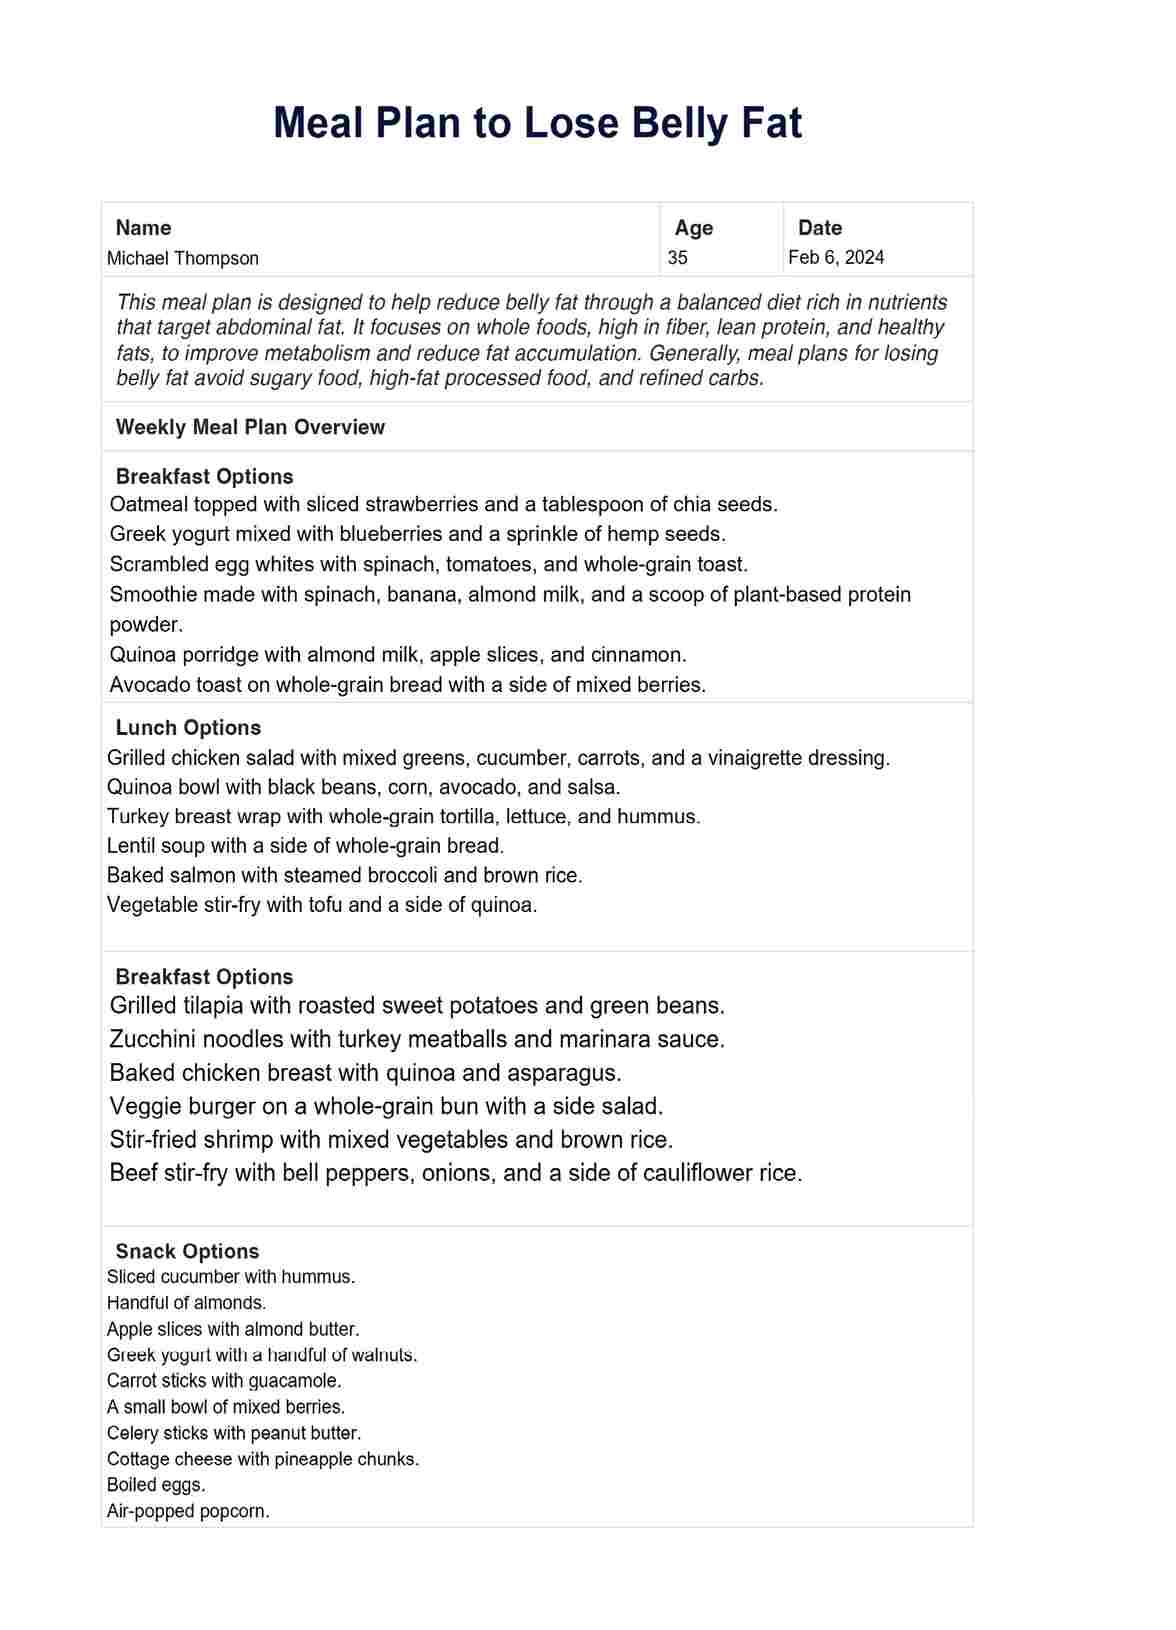 Meal Plan to Lose Belly Fat PDF Example